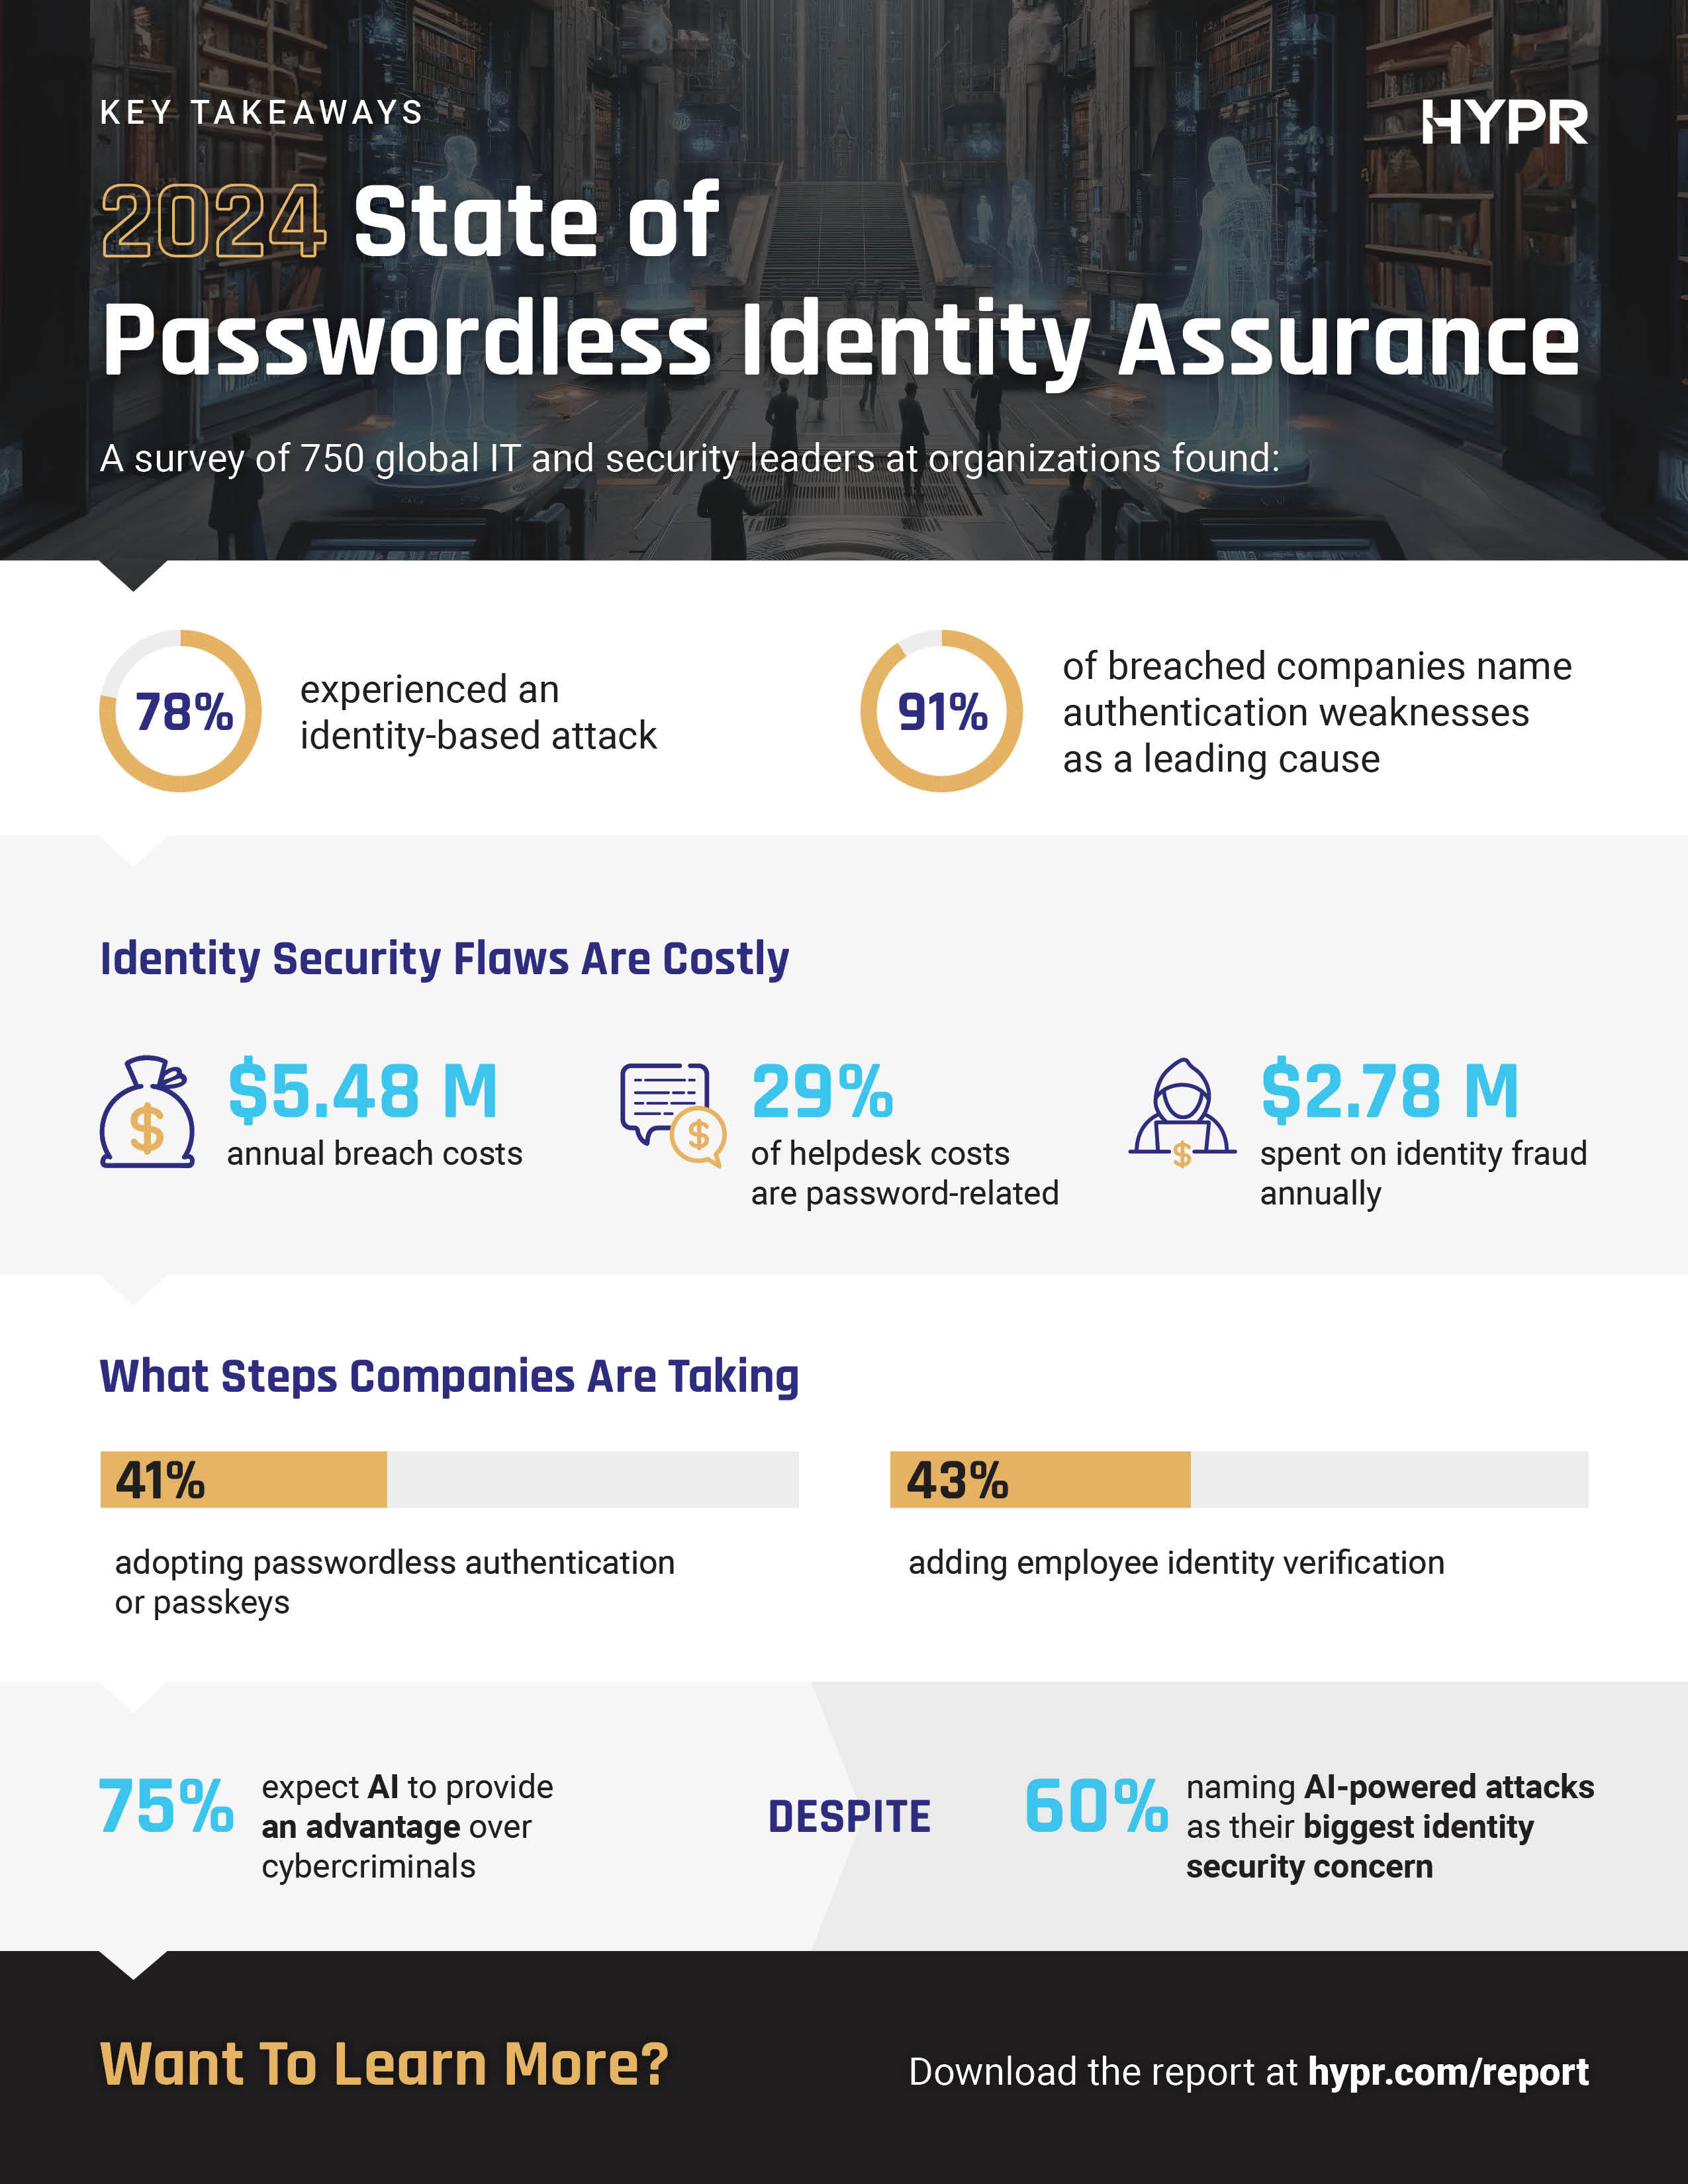 HYPR 2024 State of Passwordless Identity Assurance Report Infographic